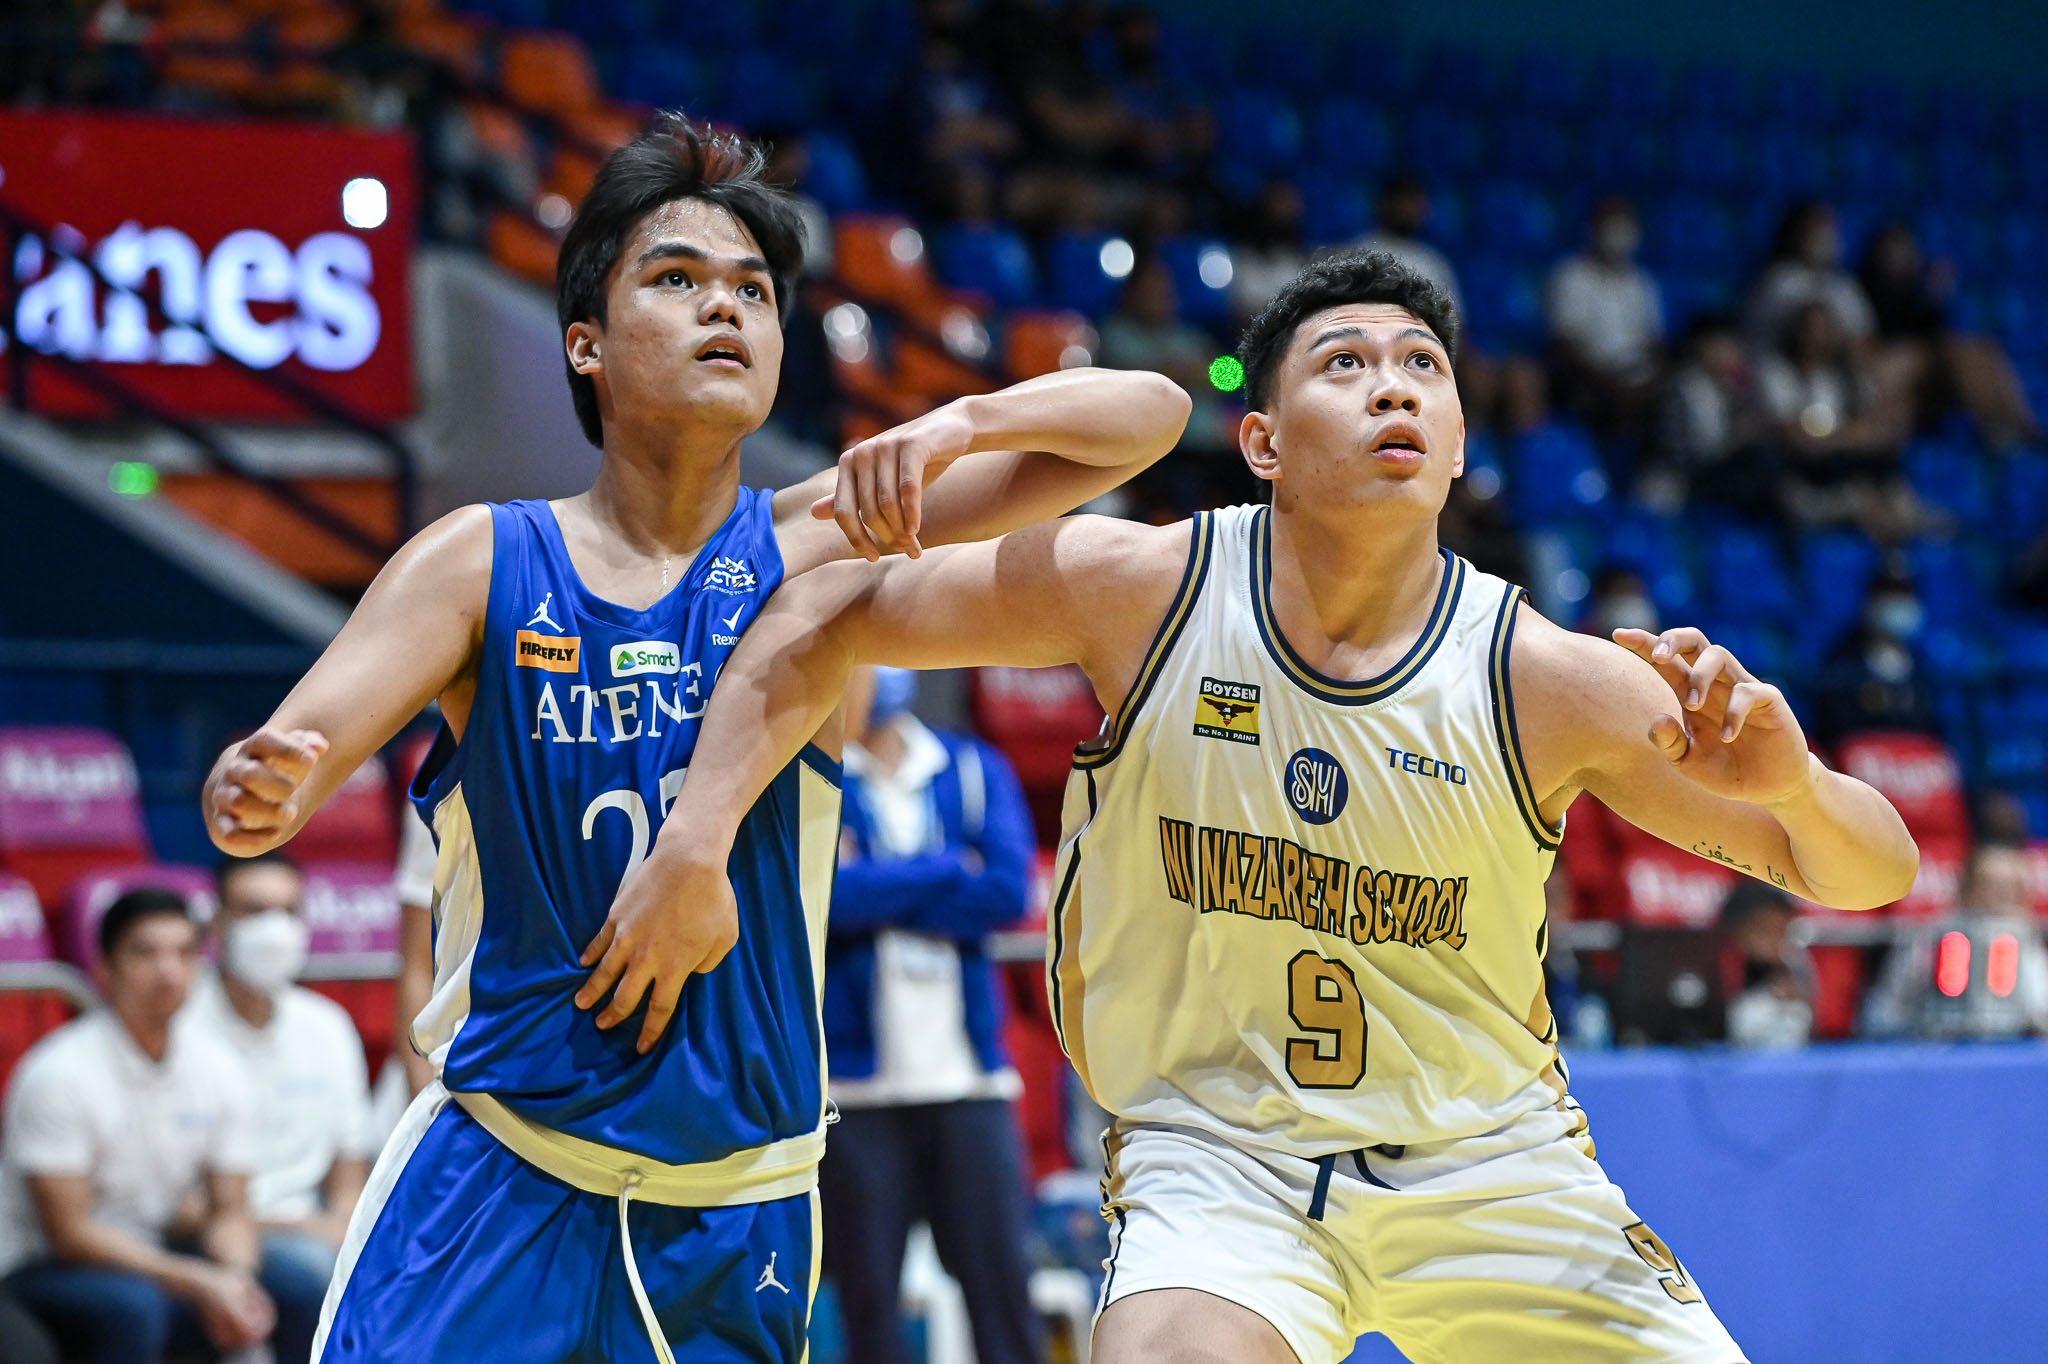 NU stays unbeaten as Ateneo’s Lebron Nieto sits out